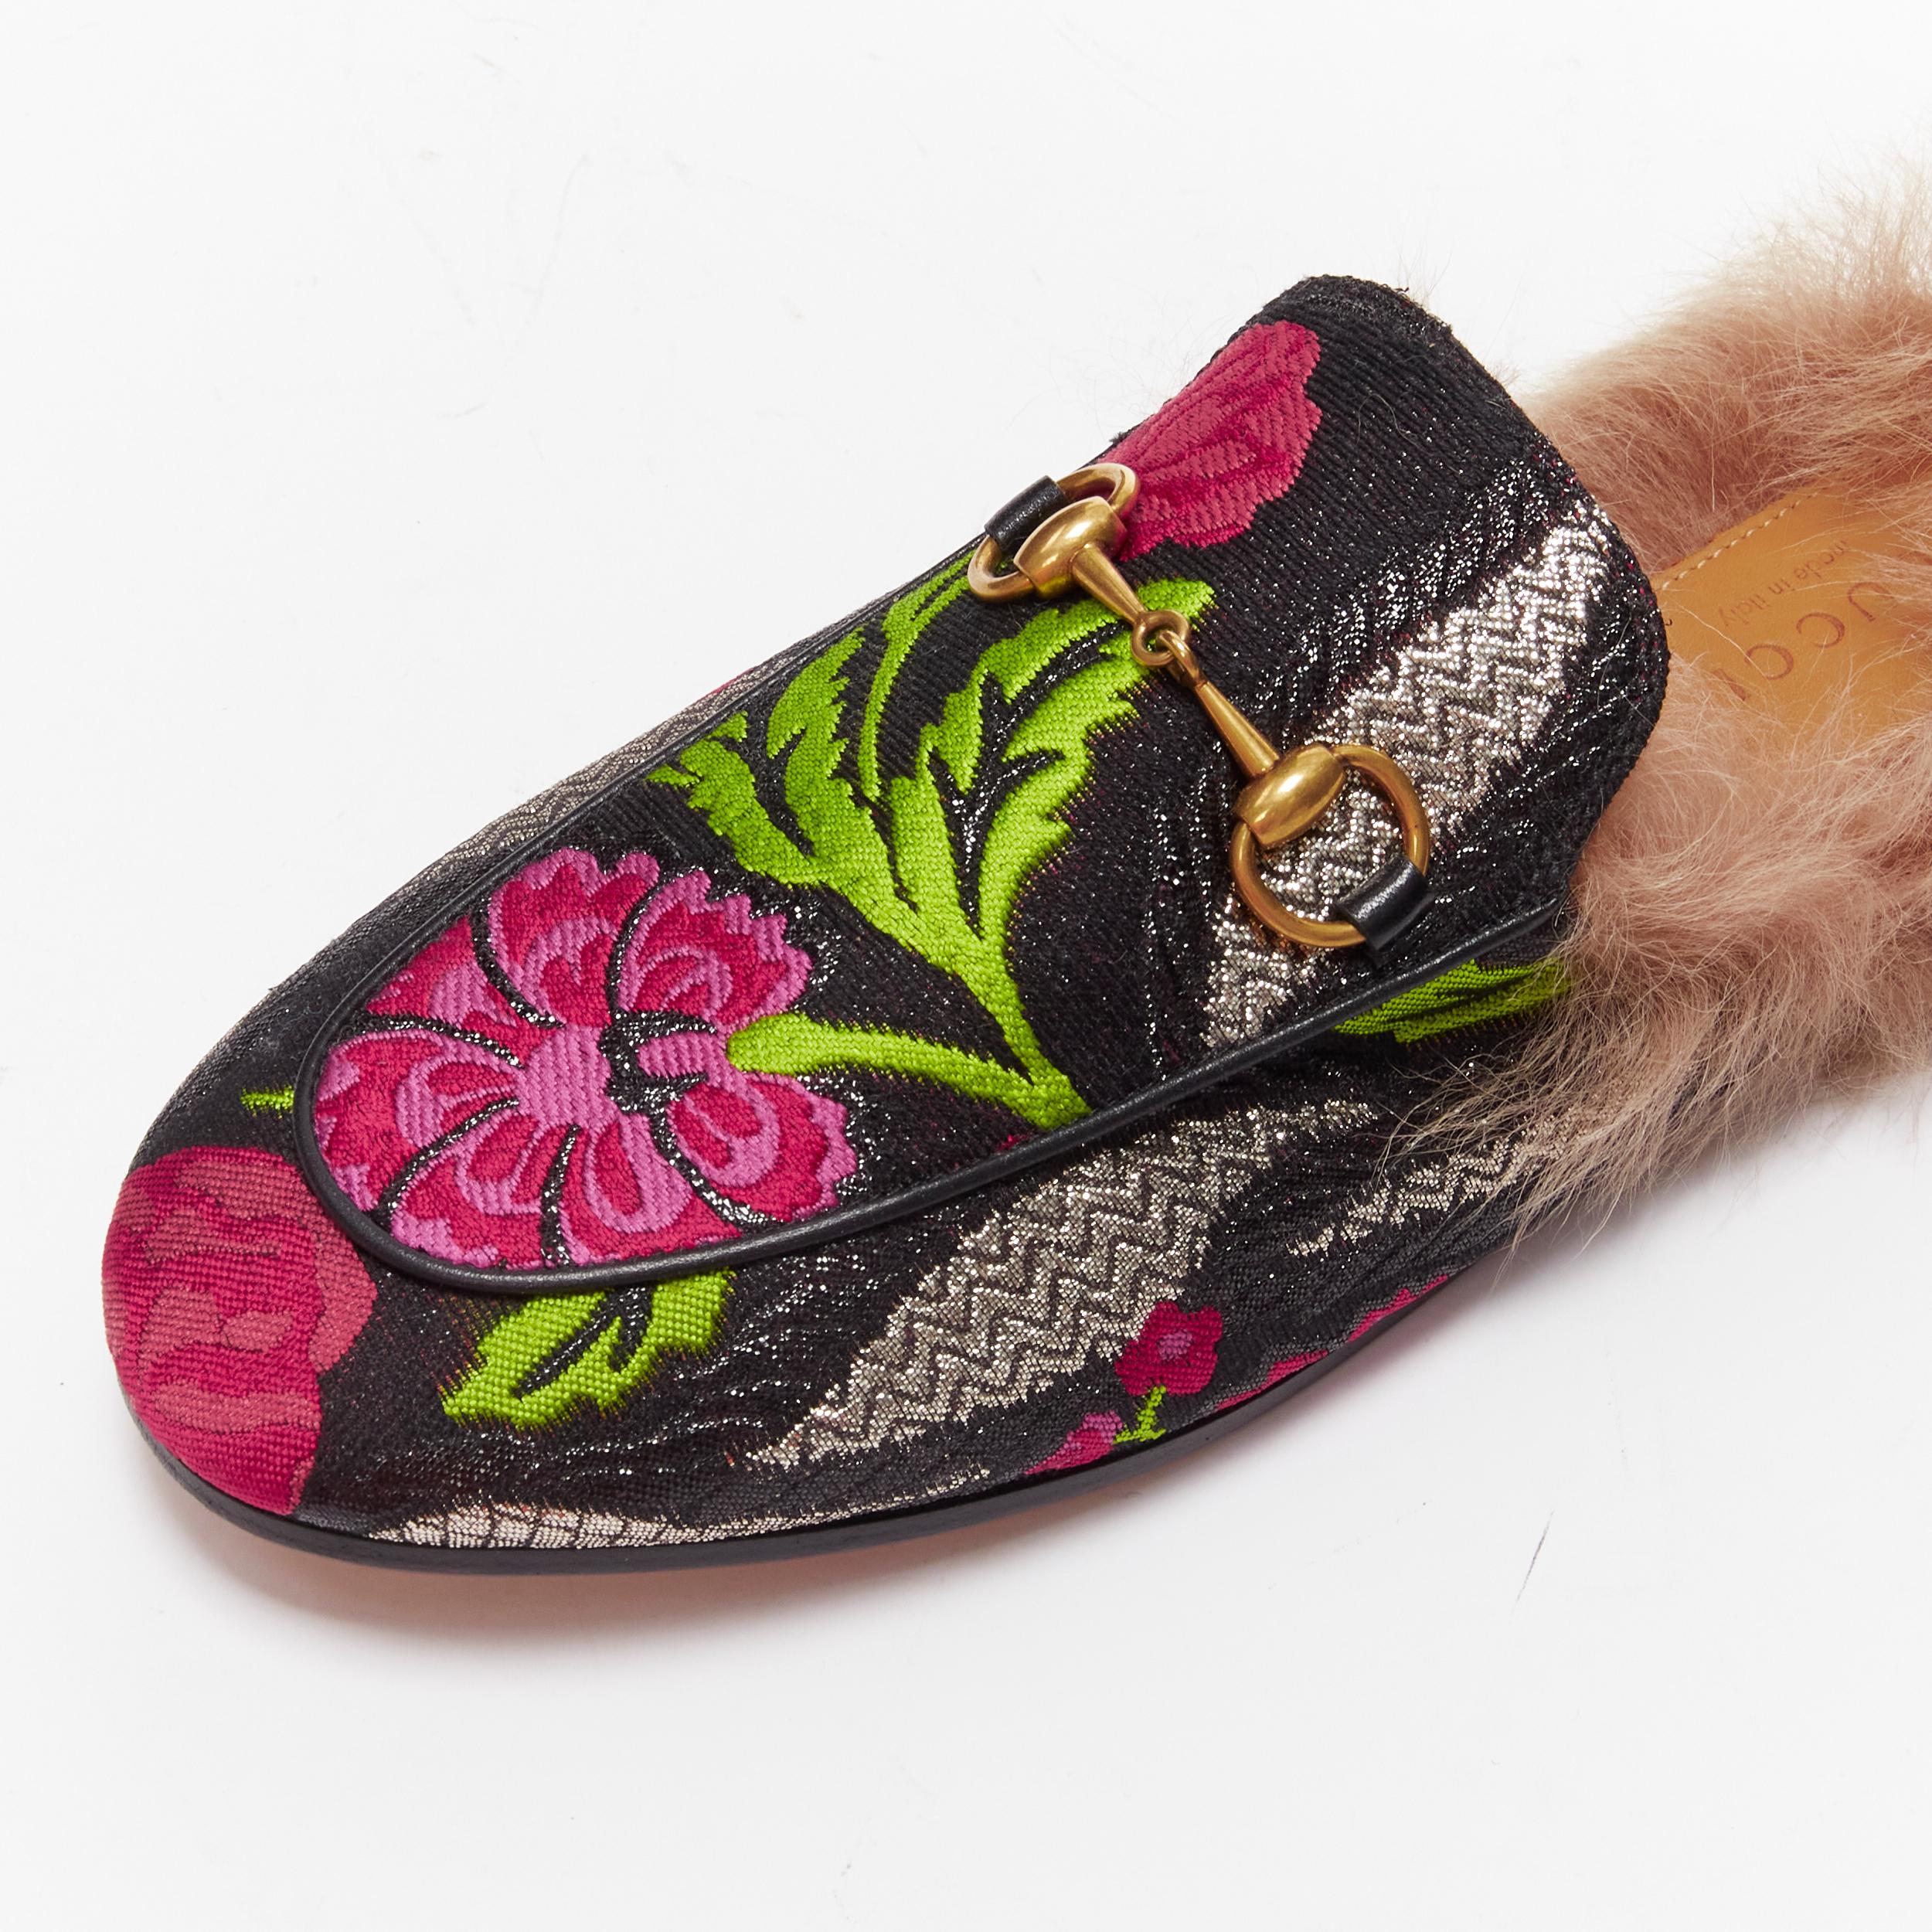 GUCCI Princetown pink floral brocade jacquard fur lined loafer slippers EU37 3